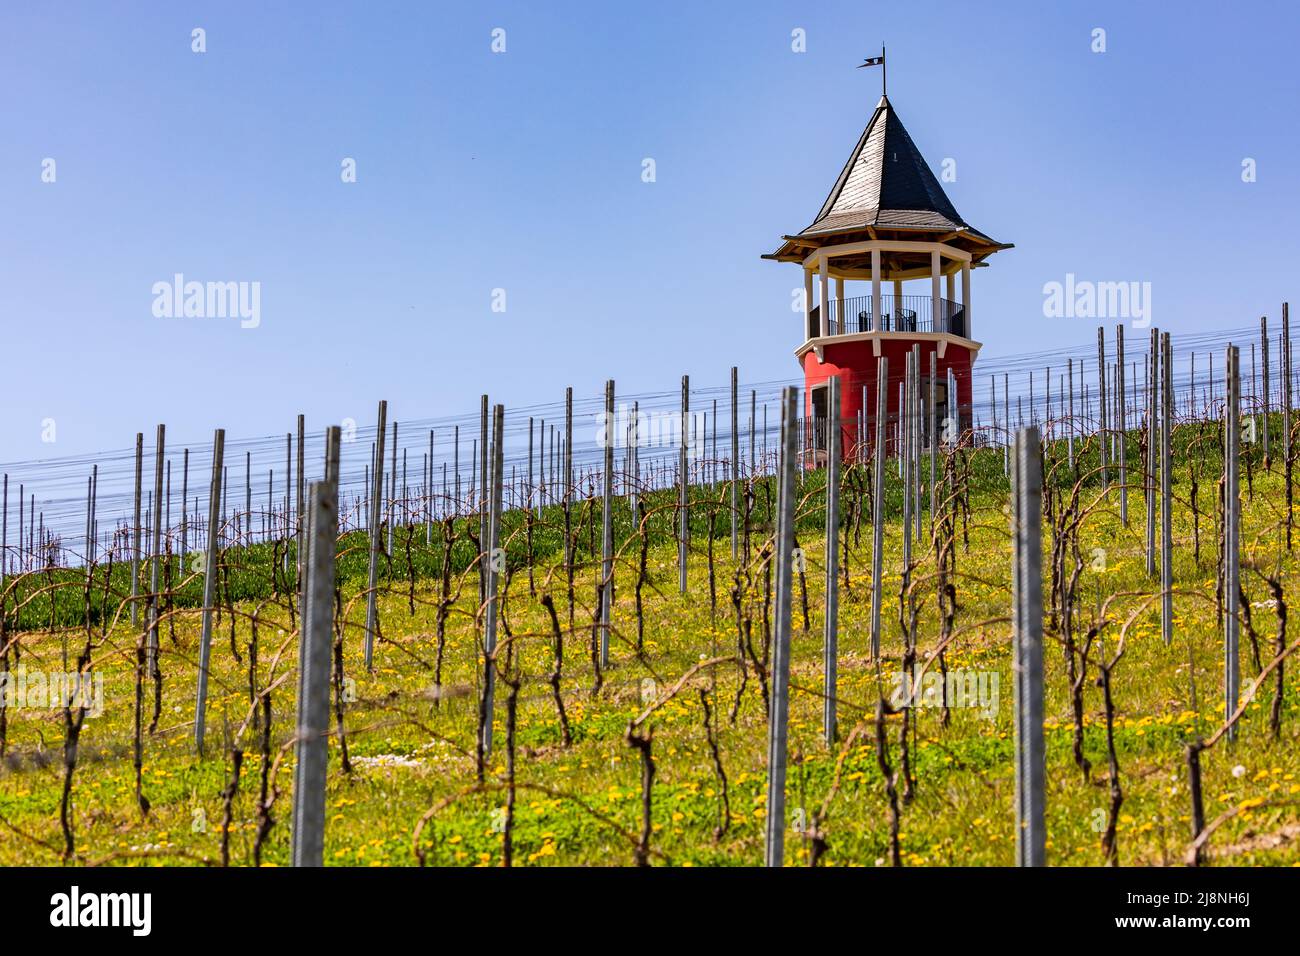 The round Burgunderturm is an observation tower surrounded by vineyards in Rhineland-Palatinate Stock Photo